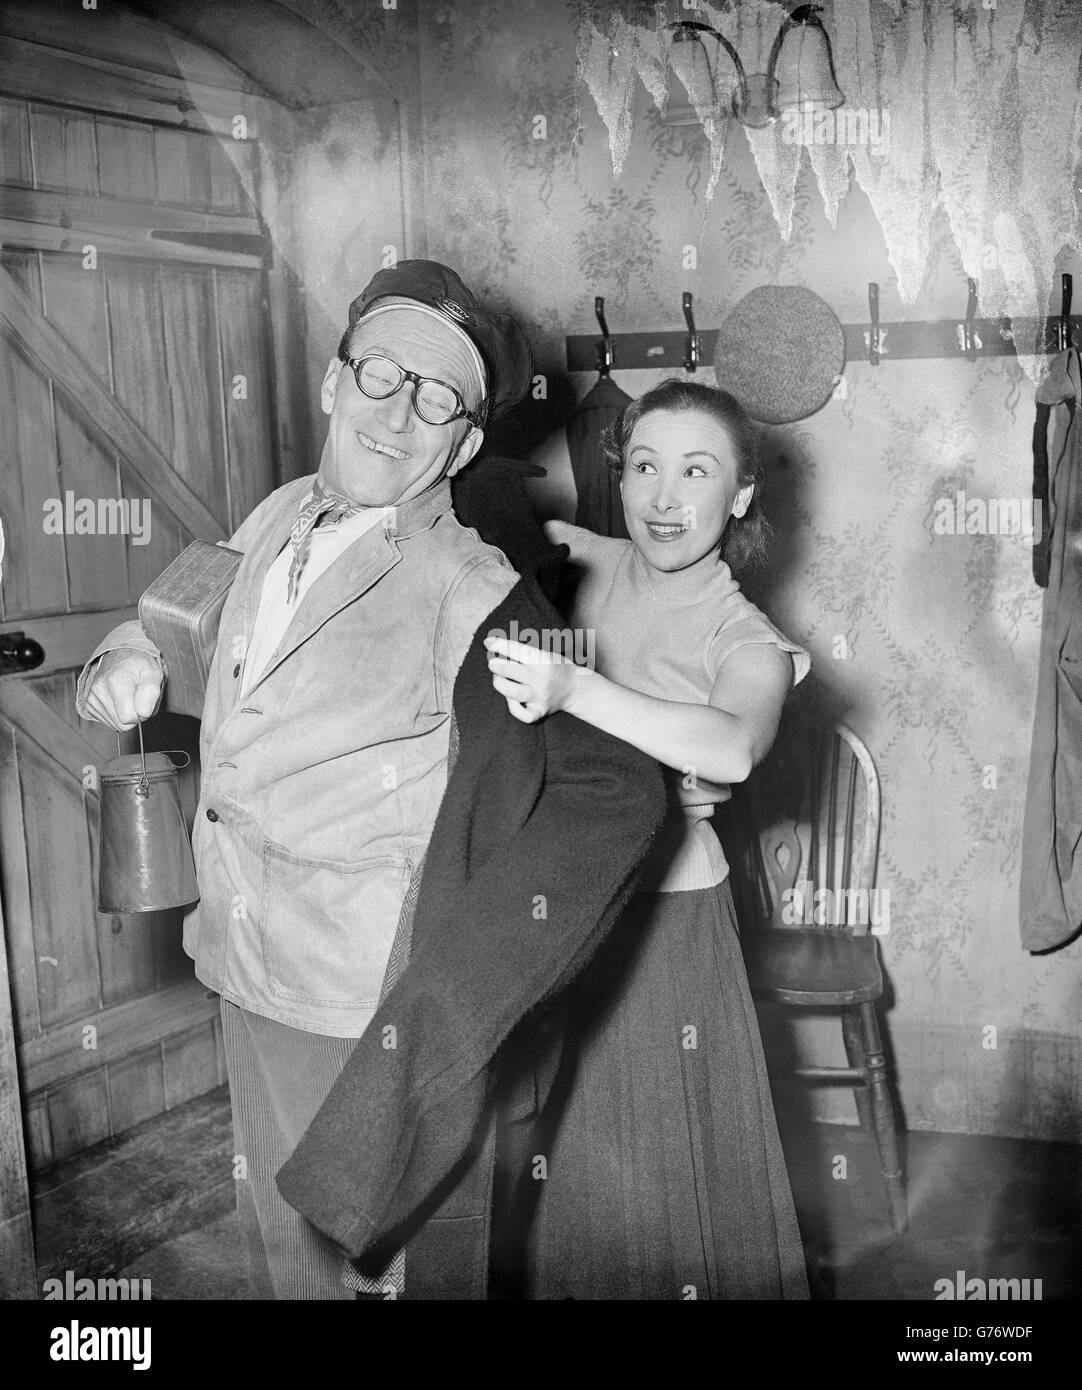 Diminutive Arthur Askey, an engine driver with a football complex in his latest comedy, is helped on with his regulation coat by his daughter, an co-actor Anthea Askey, during the dress rehearsal of 'The Love Match' at the Palace Theatre, London. Anthea is also his daughter in the play. Stock Photo